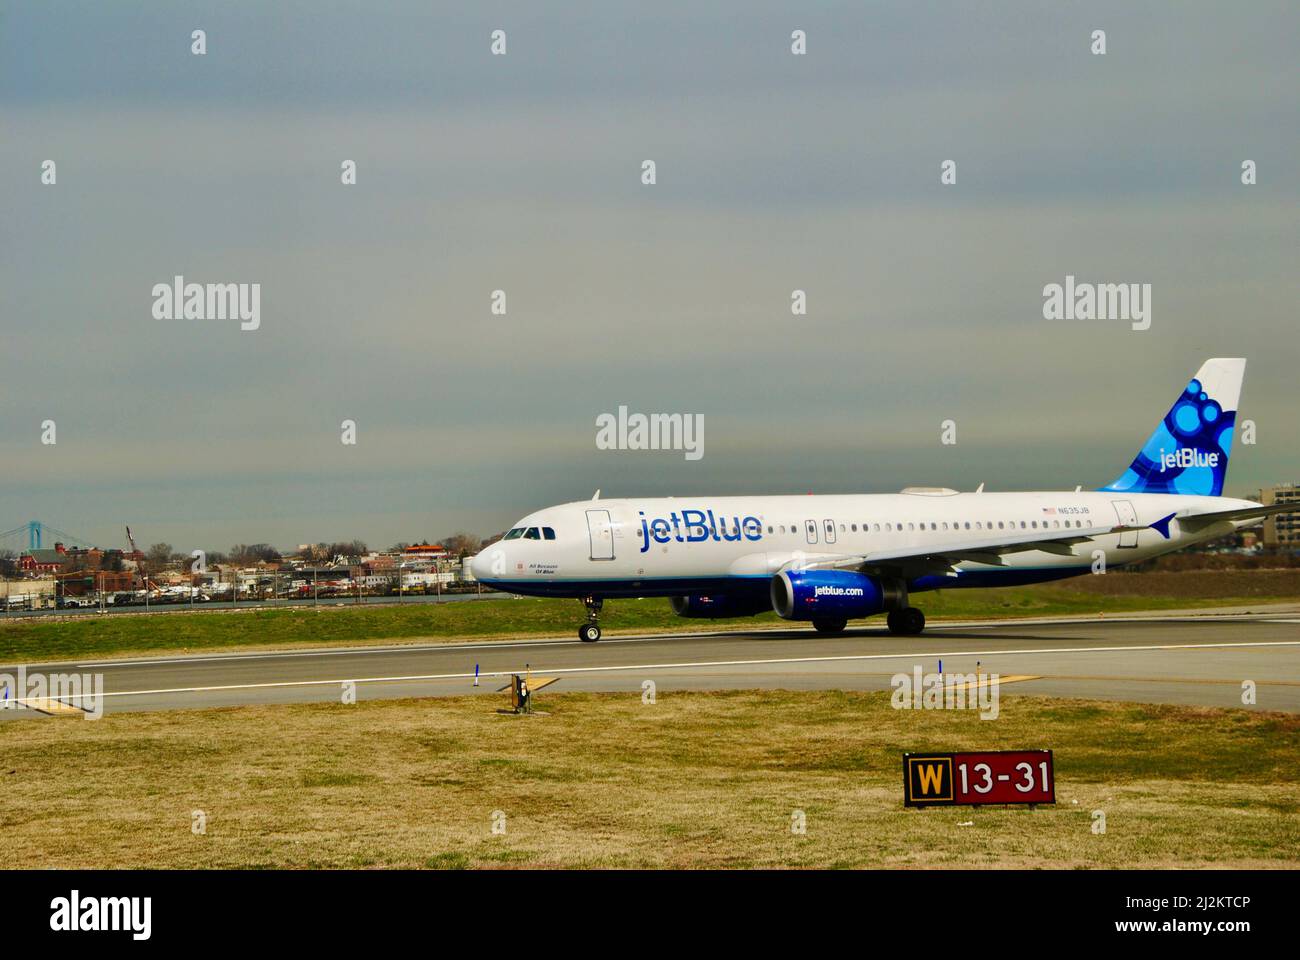 JetBlue plane on runway at La Guardia airport ready for take off. Stock Photo